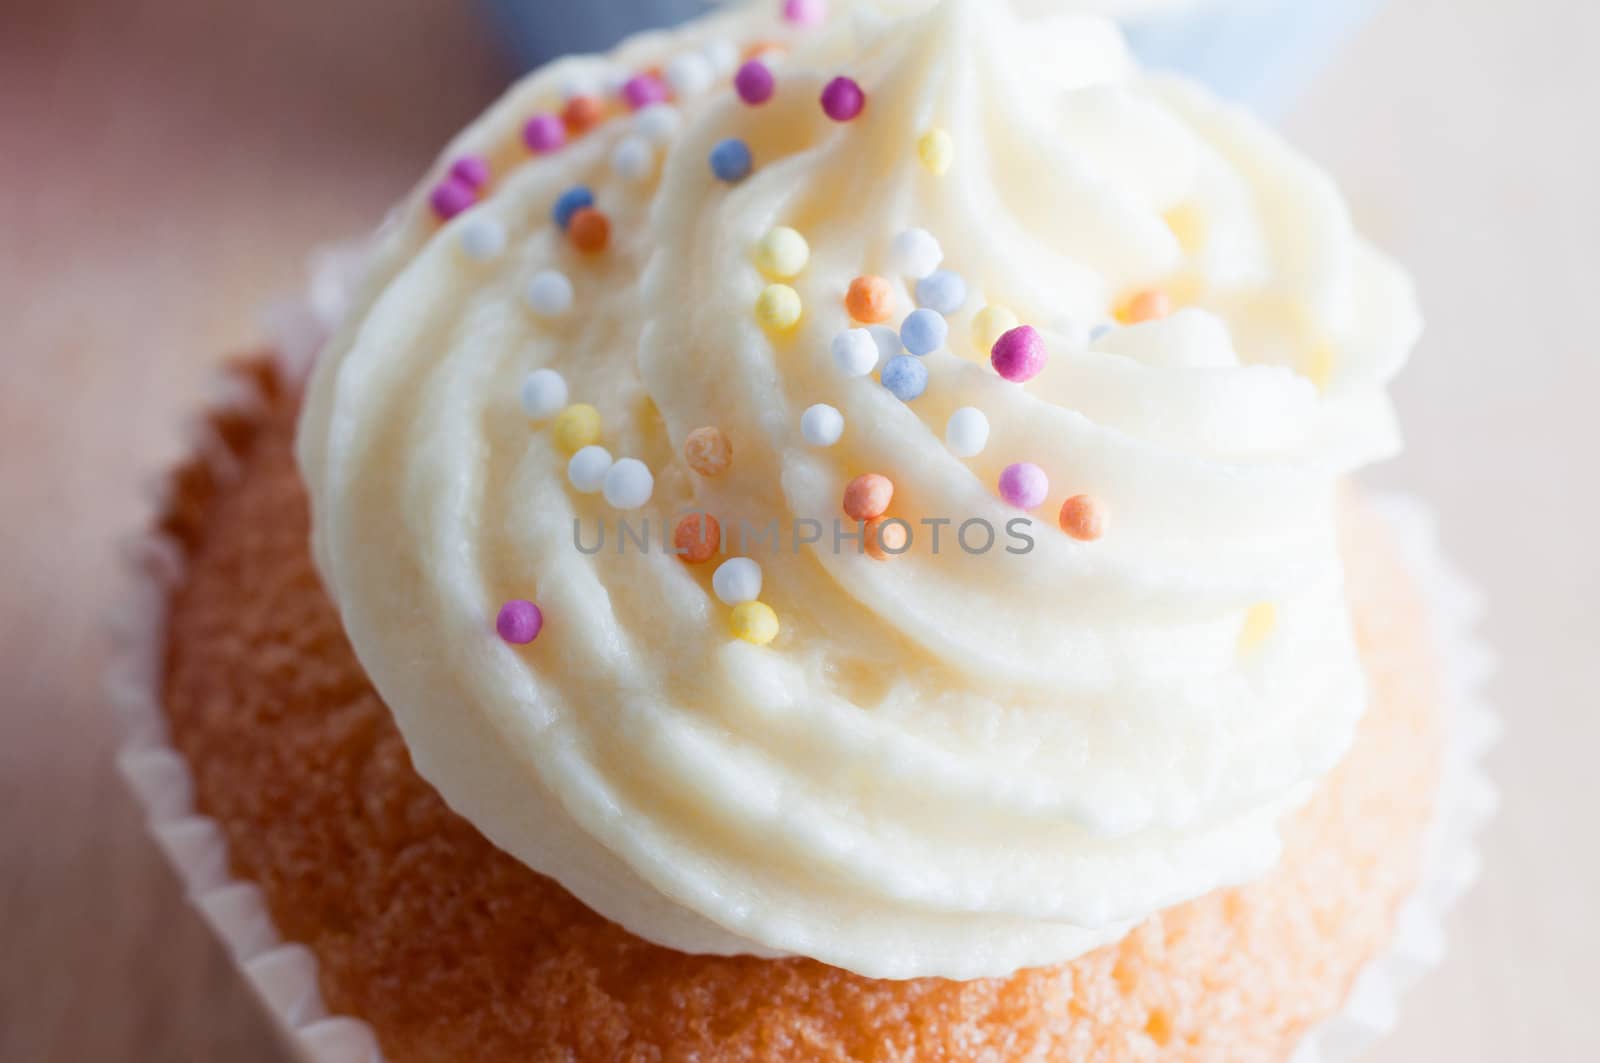 Decorated Cupcake with Sprinkles by frannyanne